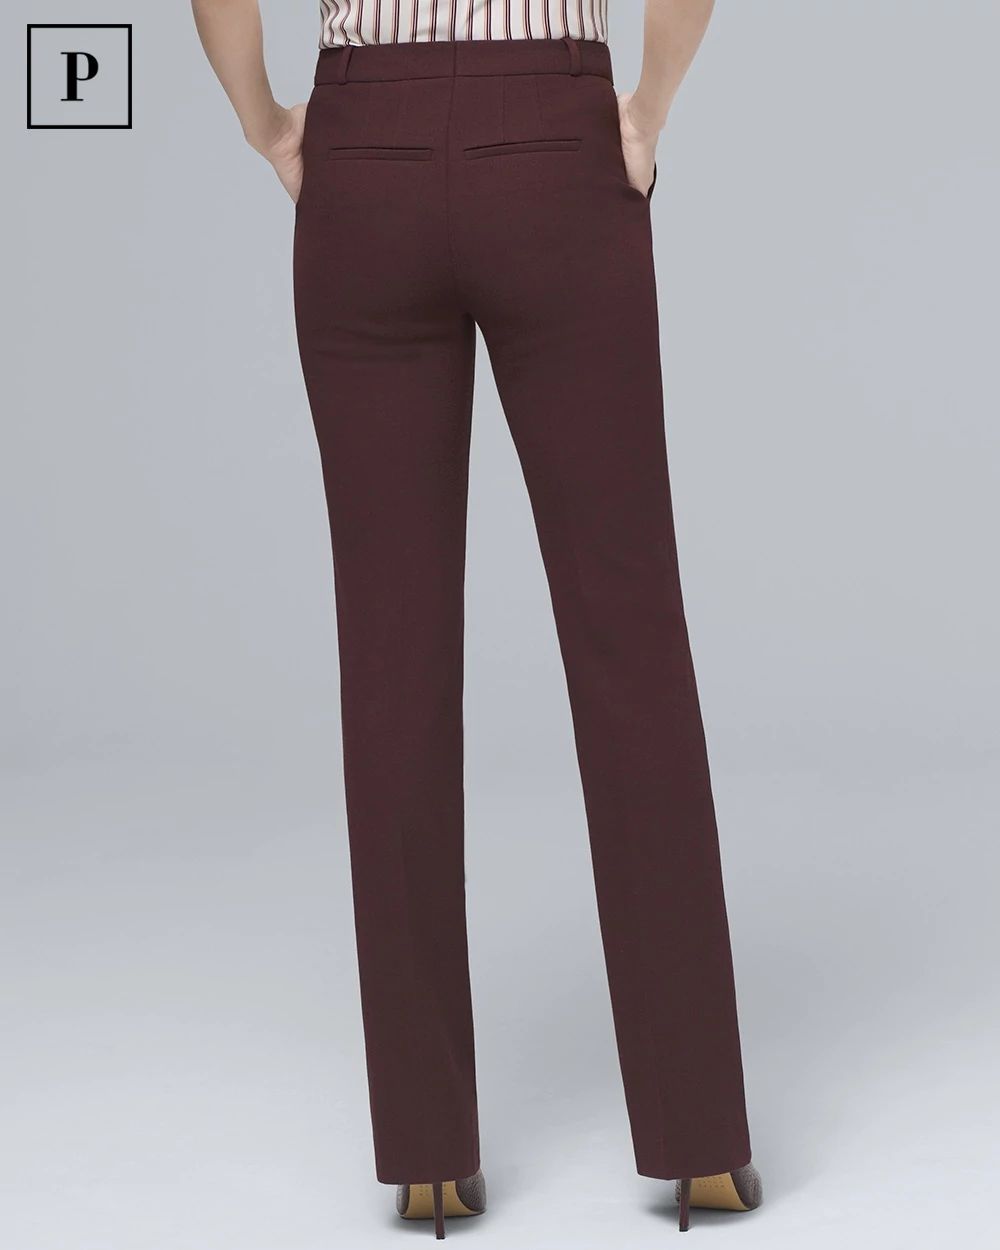 Petite Luxe Suiting Bootcut Pants click to view larger image.